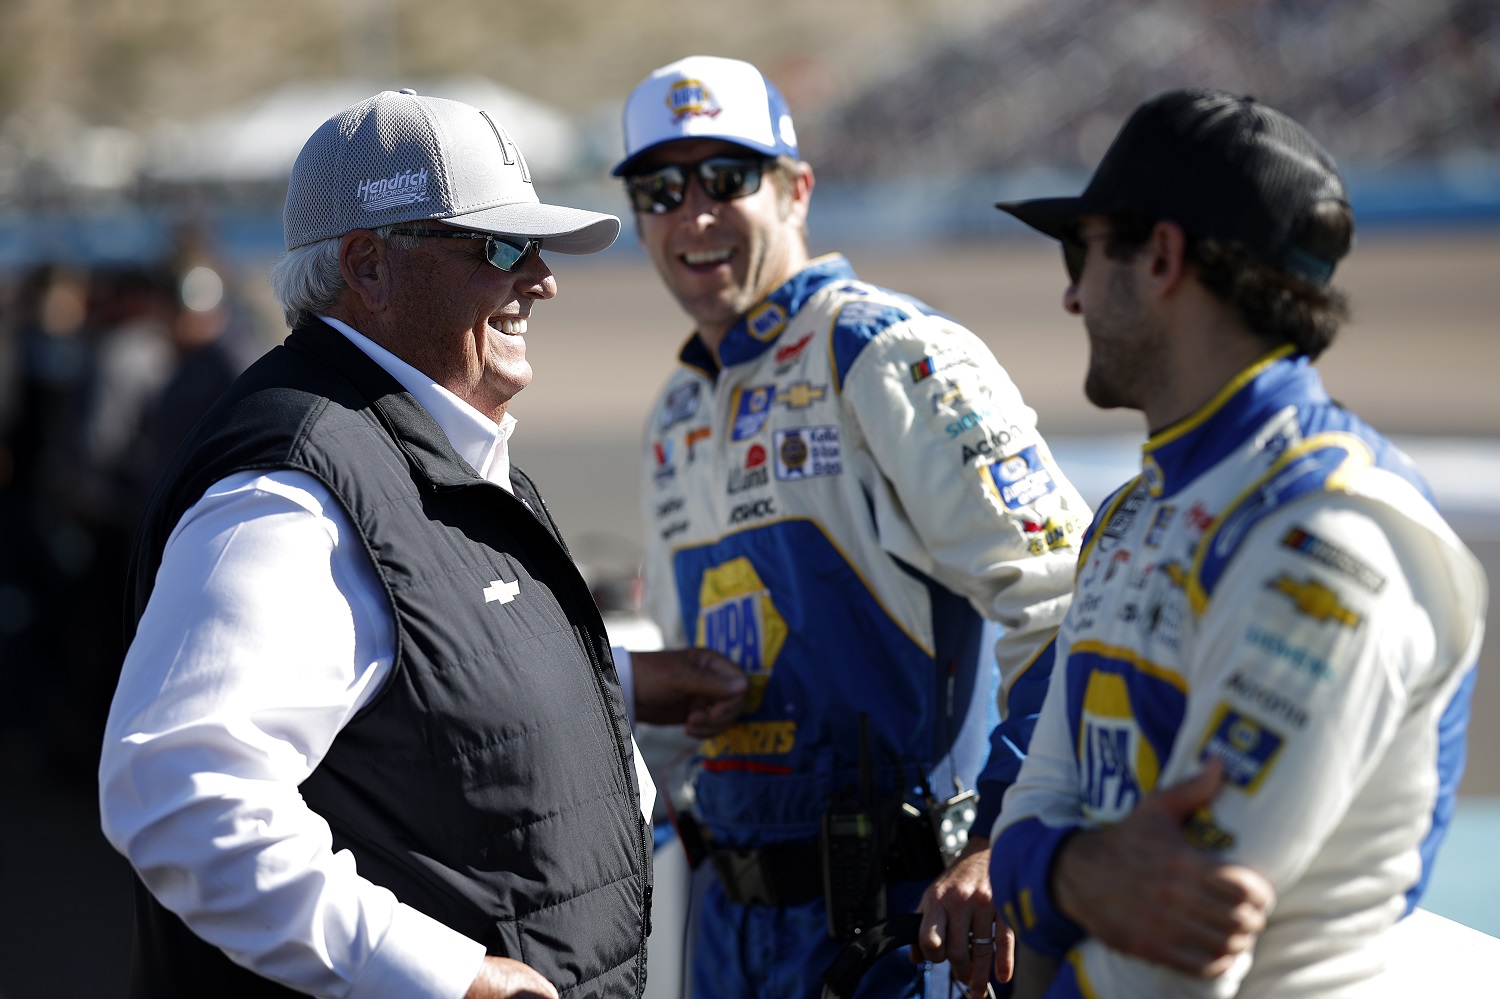 NASCAR Hall of Famer and HMS team owner Rick Hendrick spends time with crew chief Alan Gustafson and Chase Elliott on the grid prior to the NASCAR Cup Series Championship at Phoenix Raceway on Nov. 6, 2022. | Chris Graythen/Getty Images